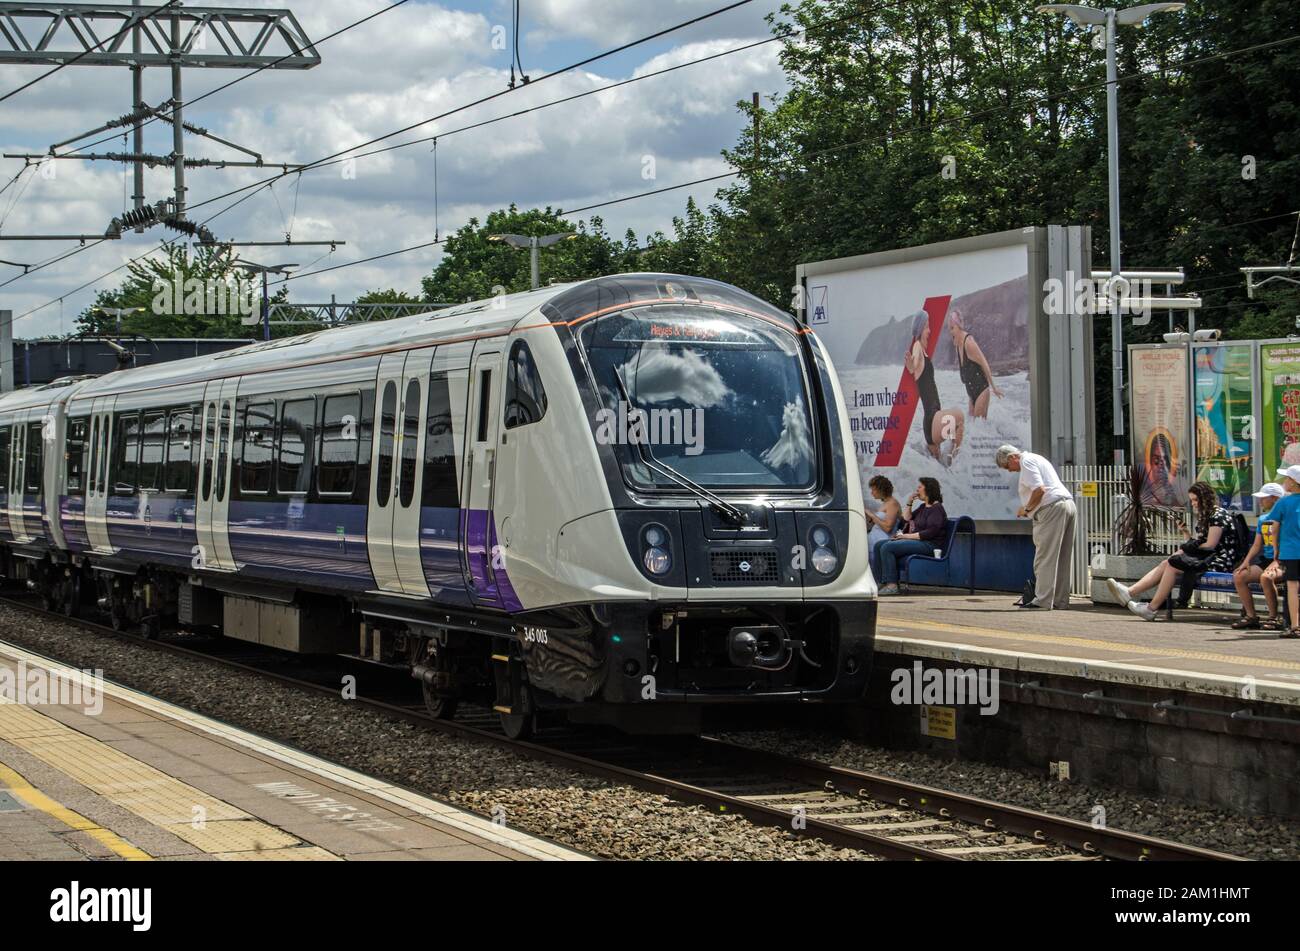 London, UK - June 22, 2019: A Transport for London railway train at Ealing Broadway station on a sunny summer day.  The new service runs from central Stock Photo